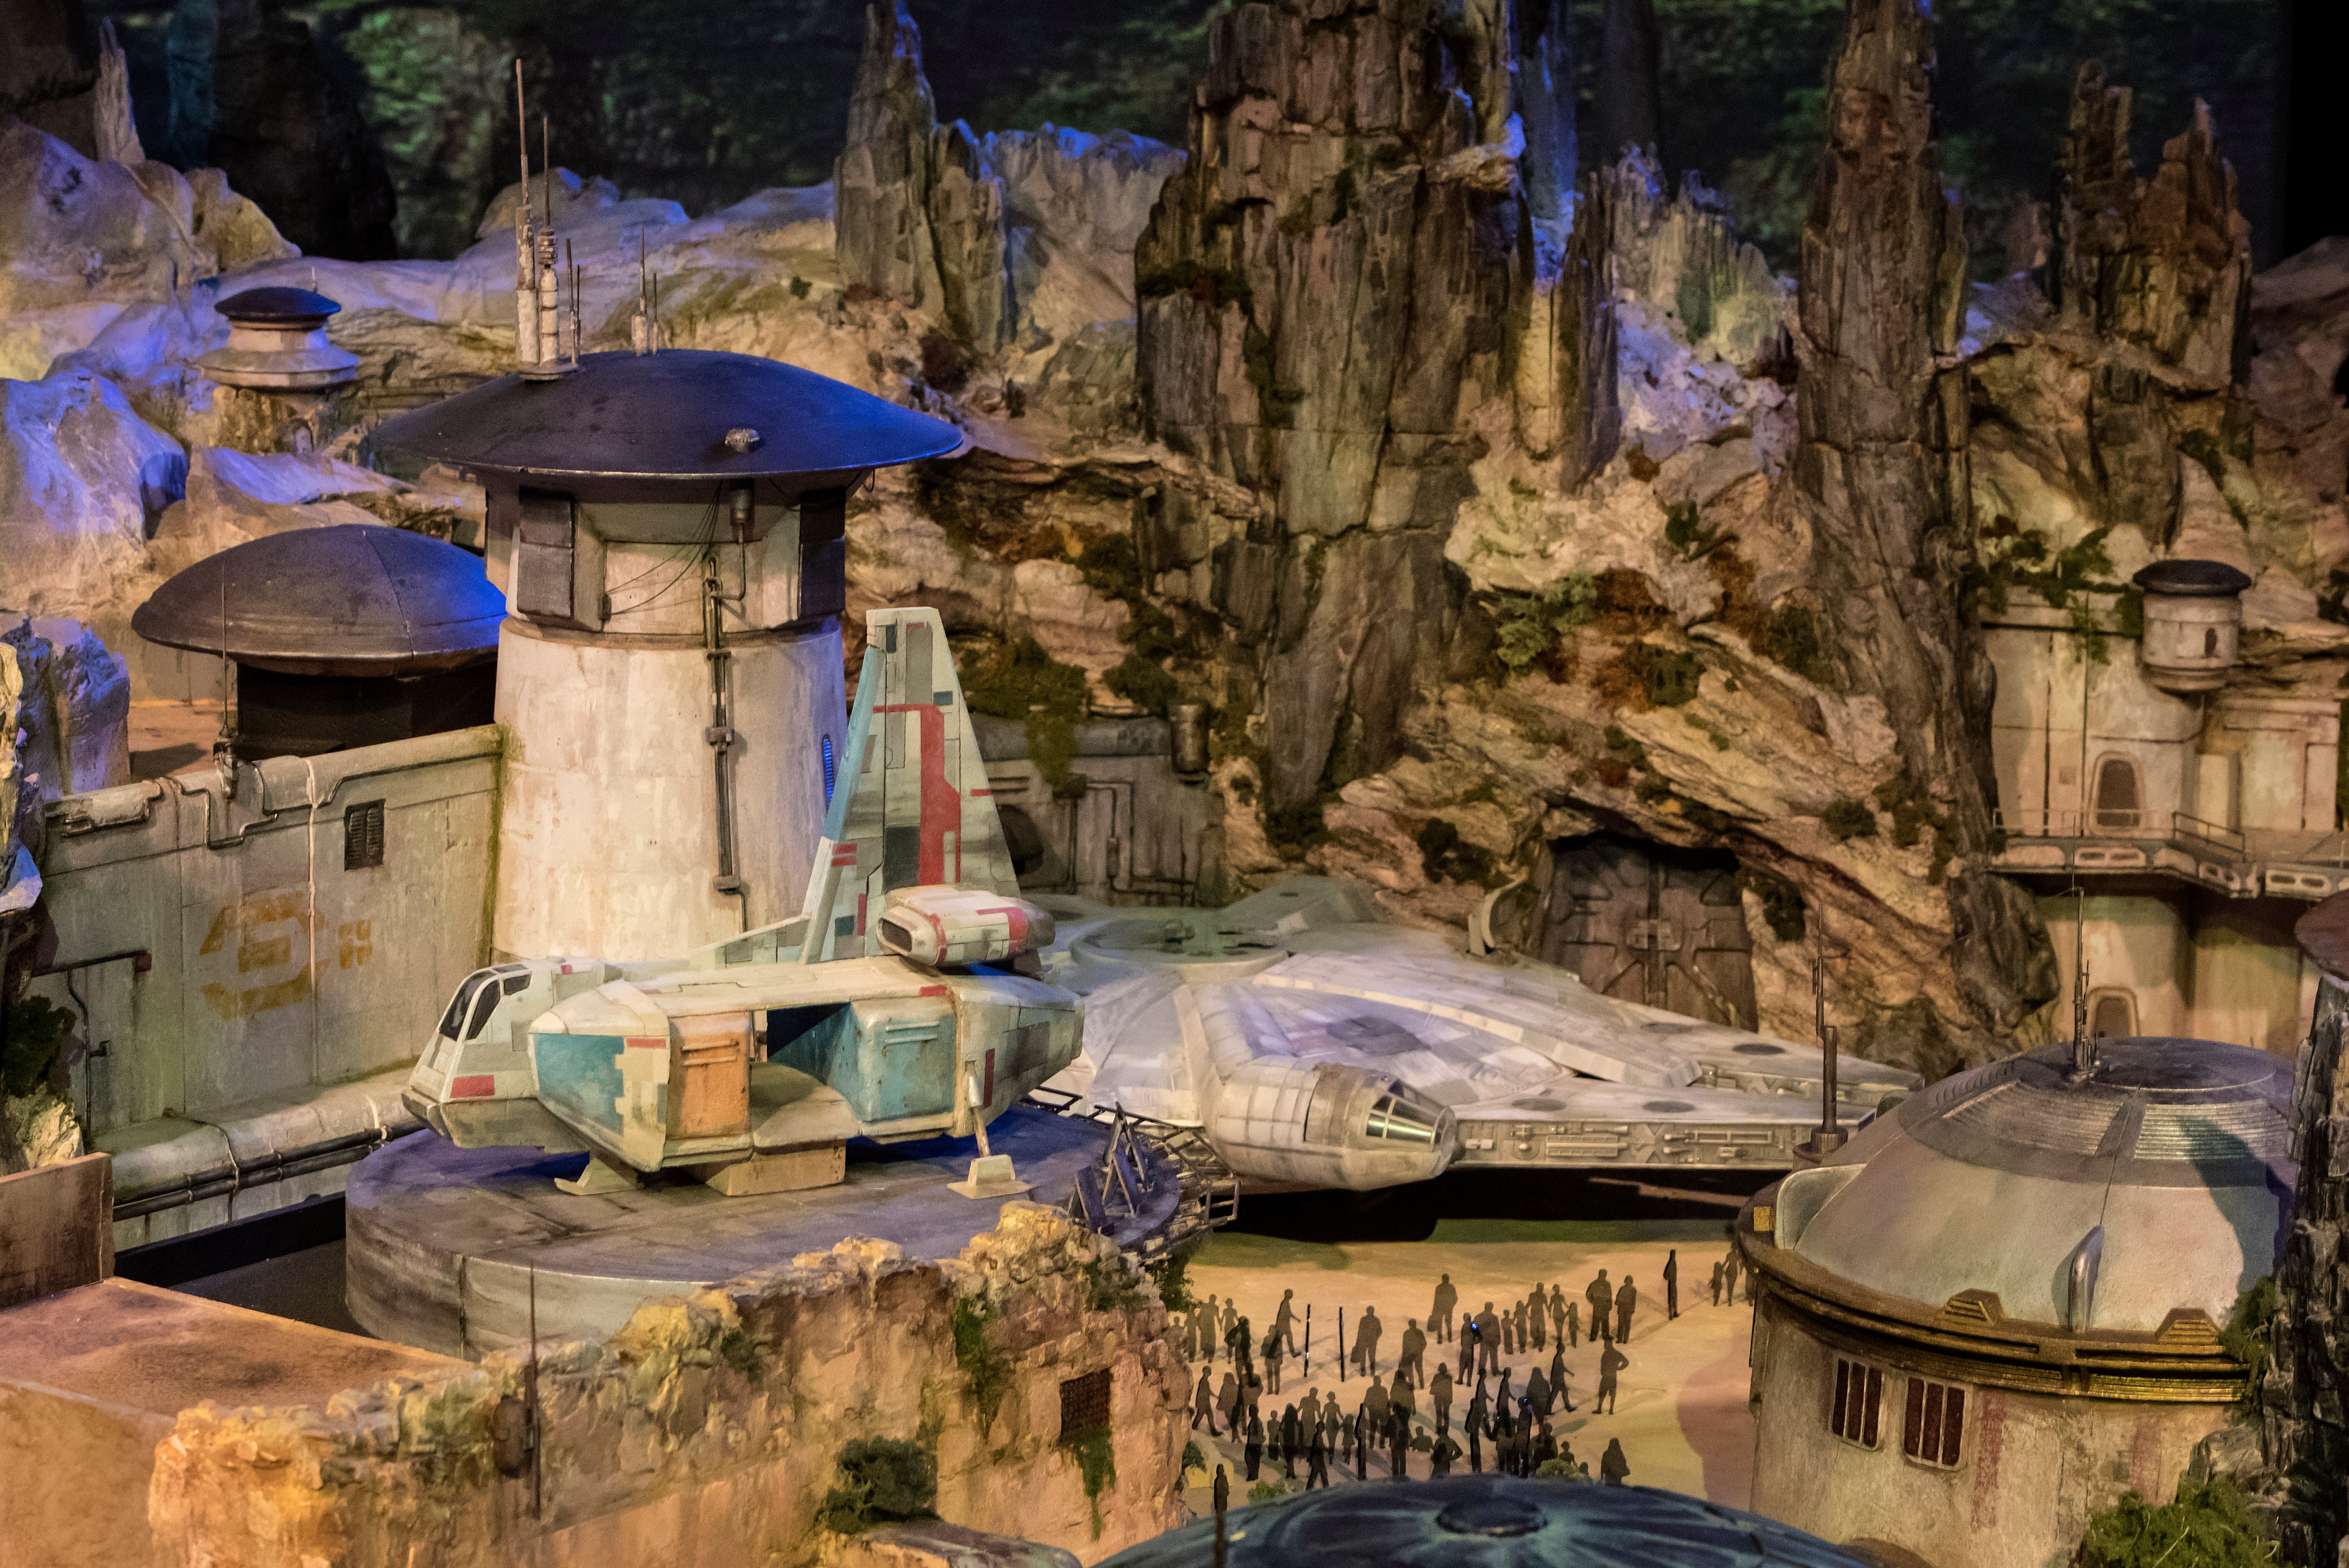 The fully detailed model of the Star Wars-themed park, under development at Disneyland in Anaheim, Calif., remains on display in Walt Disney Parks and Resorts 'A Galaxy of Stories' pavilion throughout D23 Expo at the Anaheim Convention Center. The exhibition gives D23 Expo guests an up-close look at what's to come on this never-before seen planet. (Joshua Sudock—Disneyland Resort)